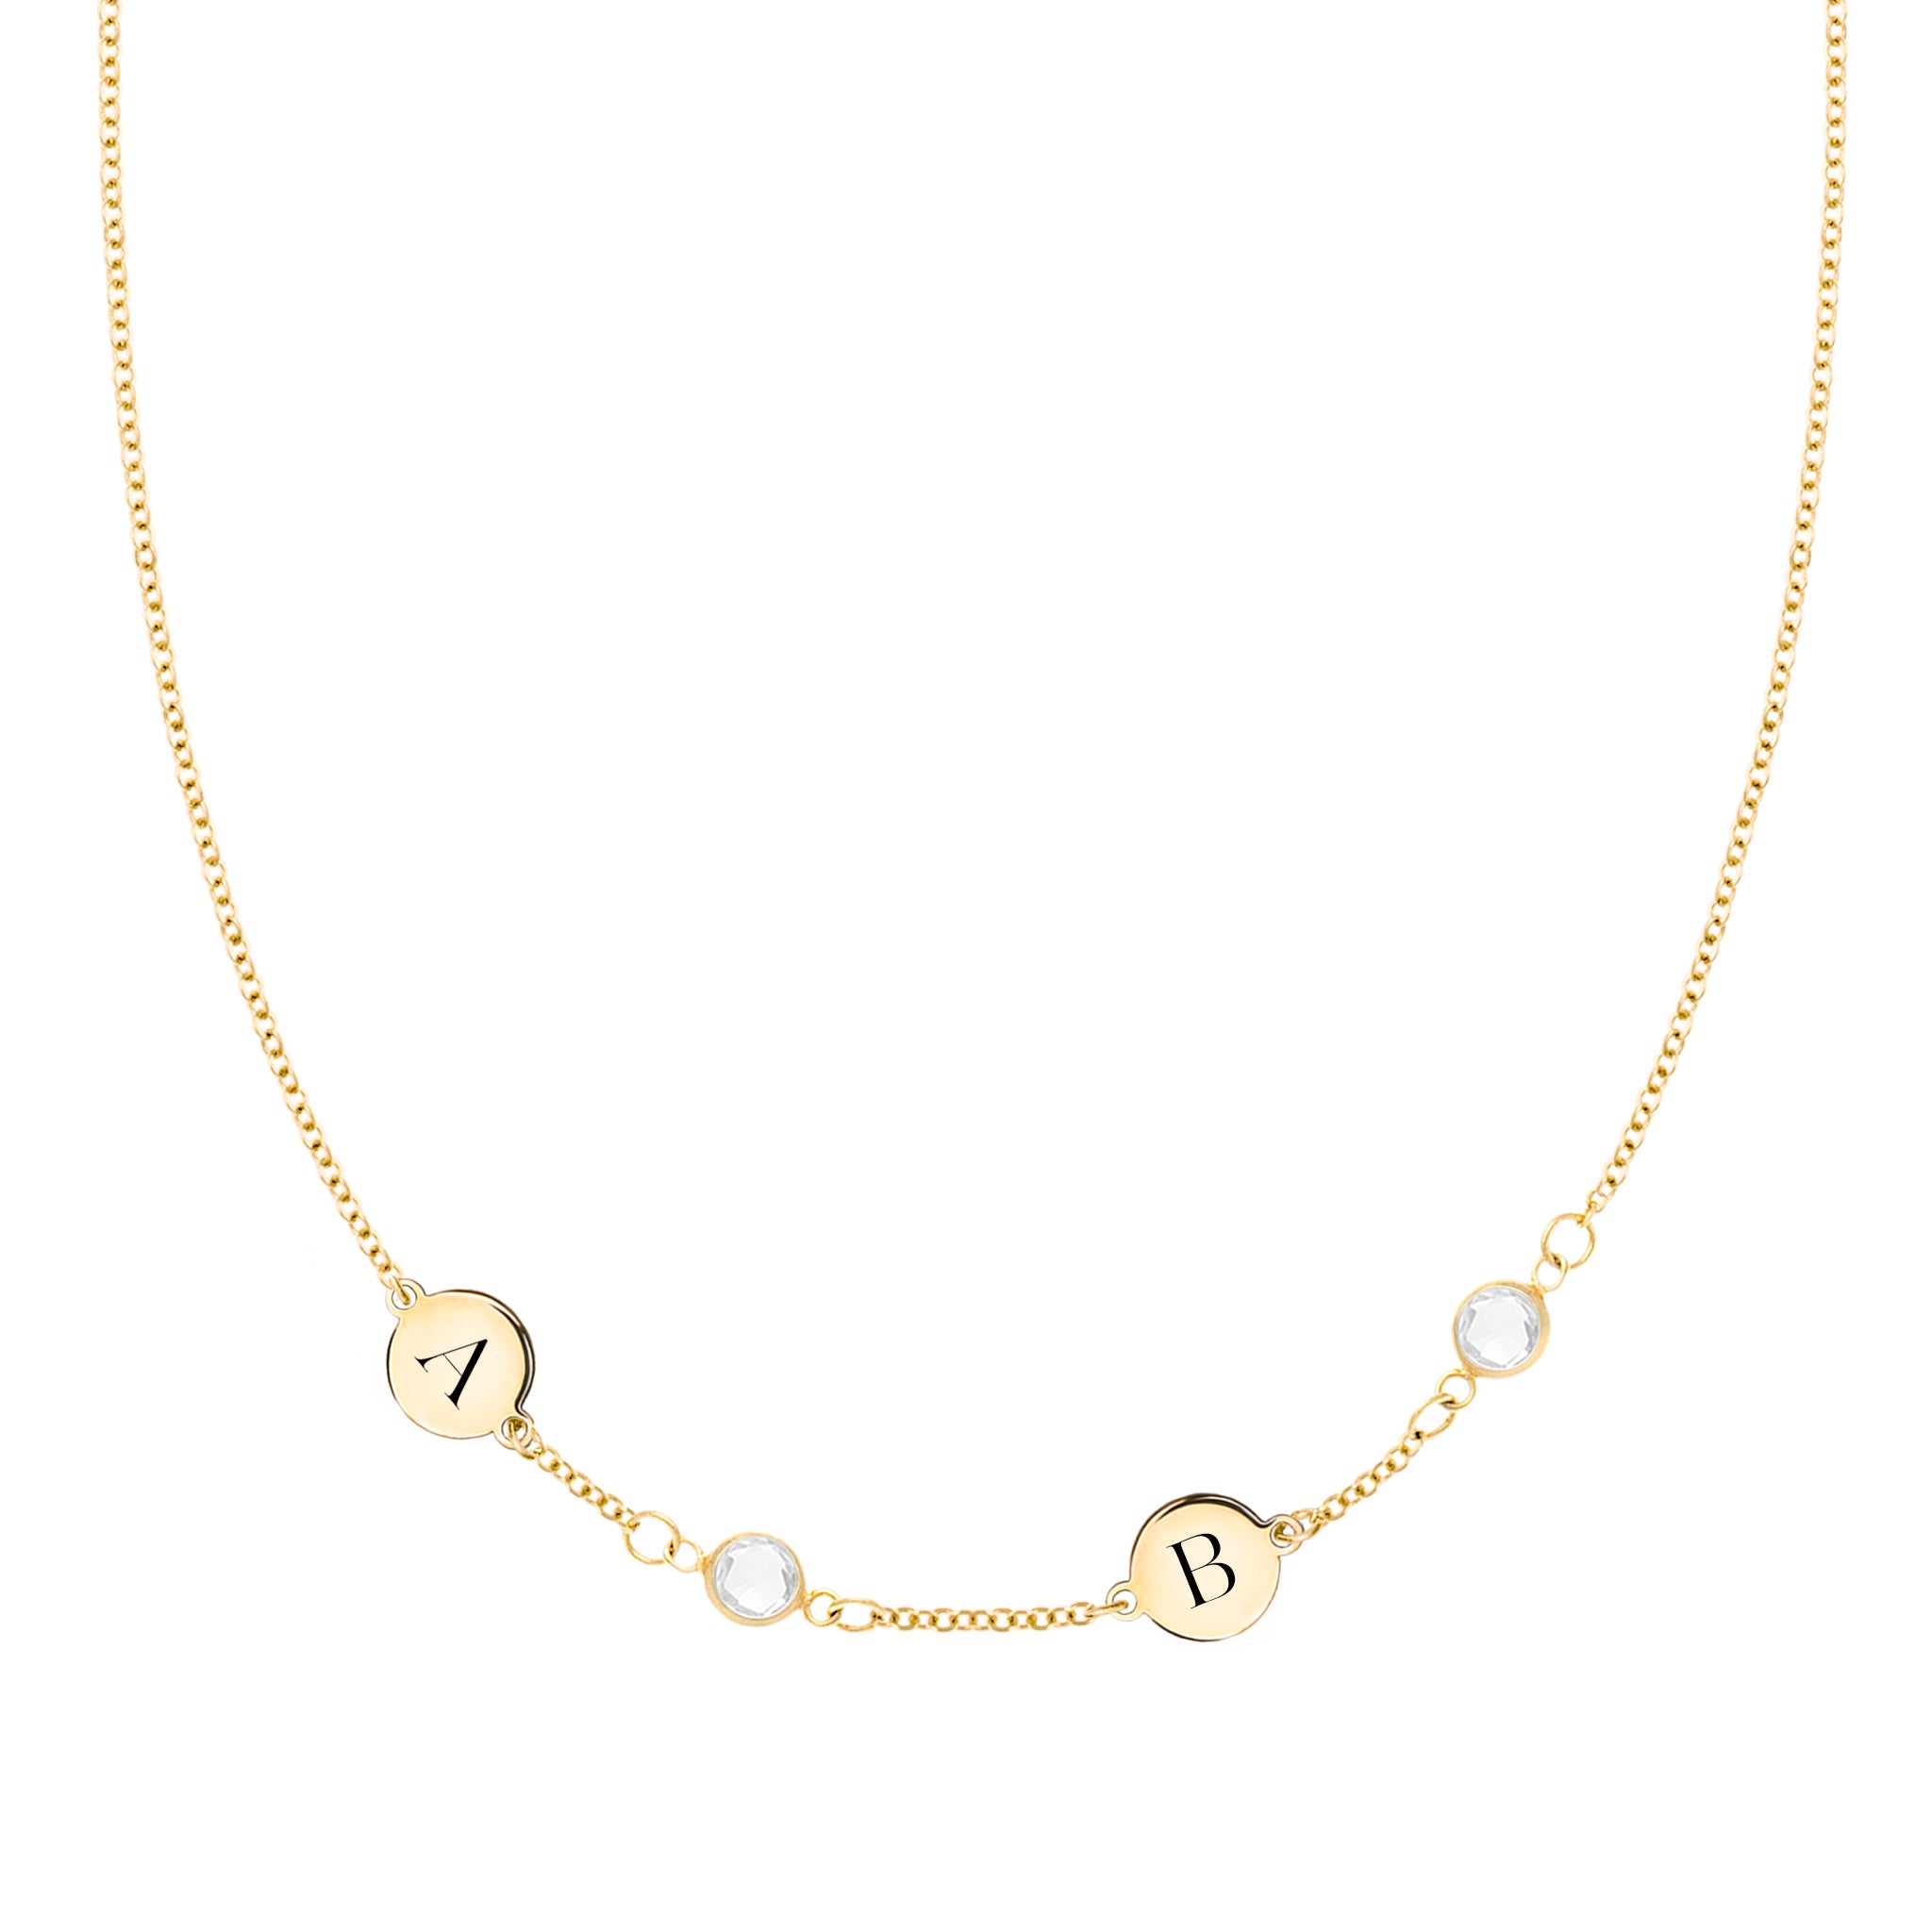 Girls Sweetheart Gold-Filled Initial Necklace - The Vintage Pearl